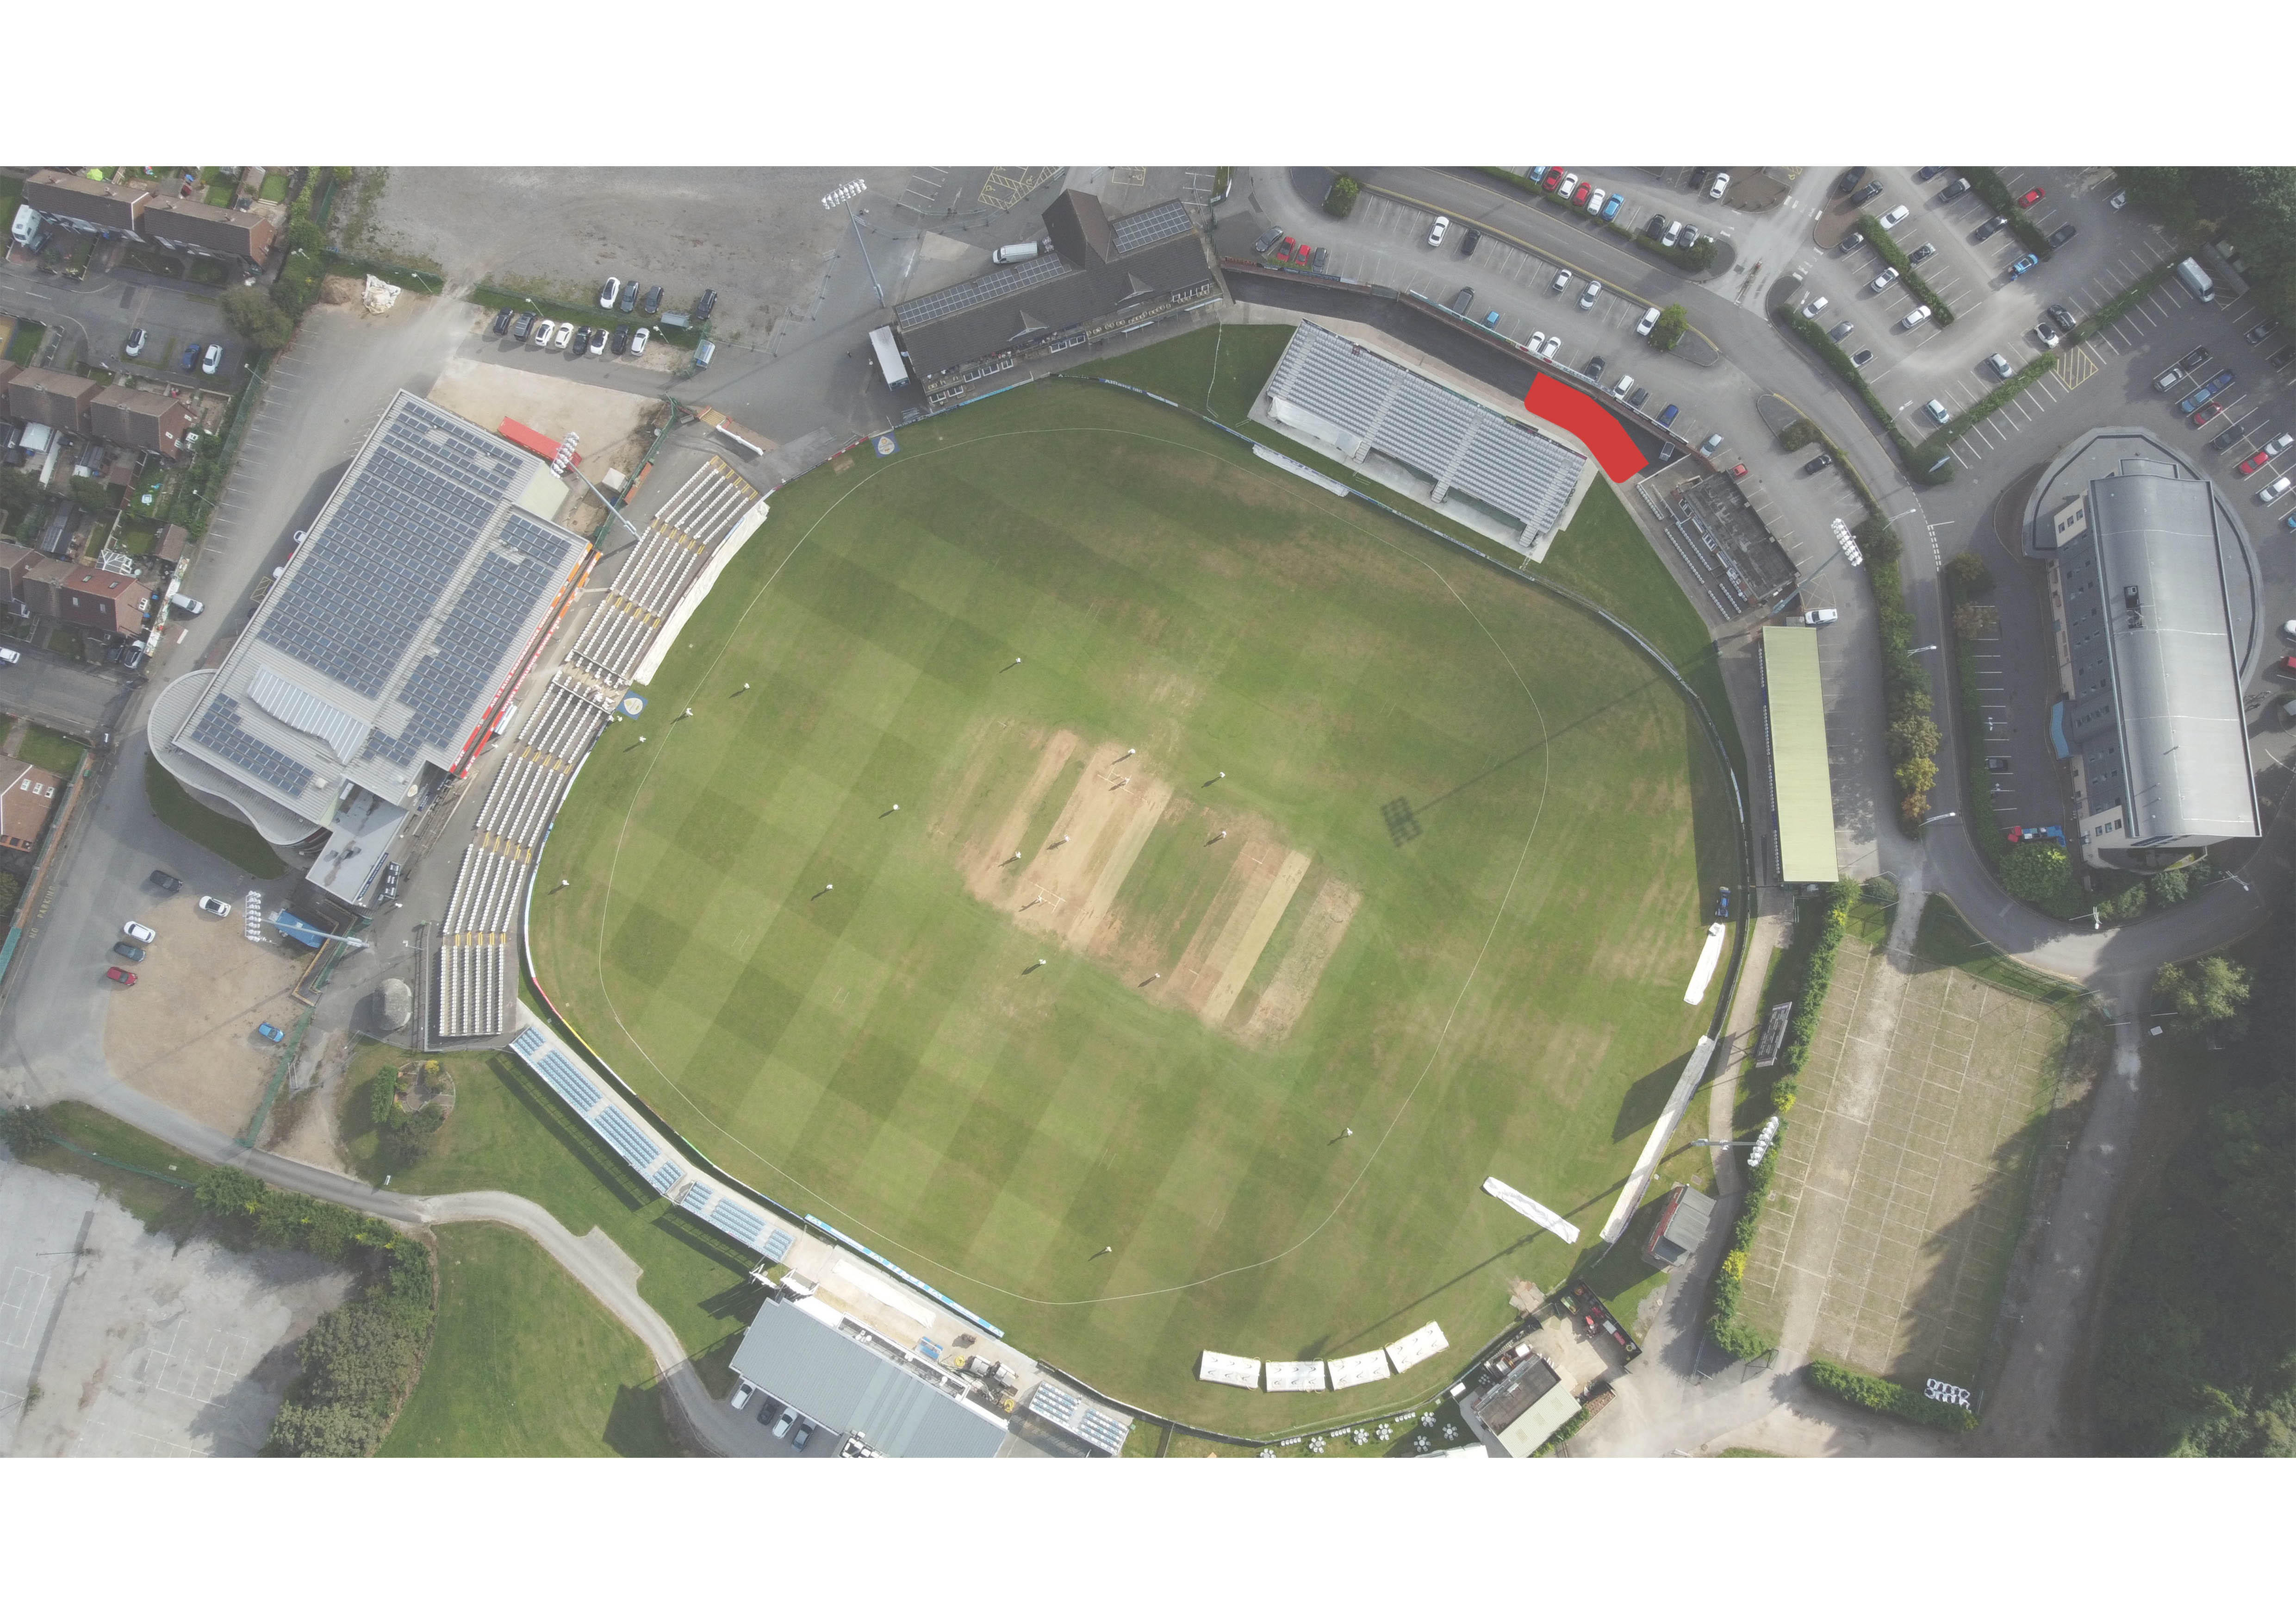 Architects to design new cricket club facilities